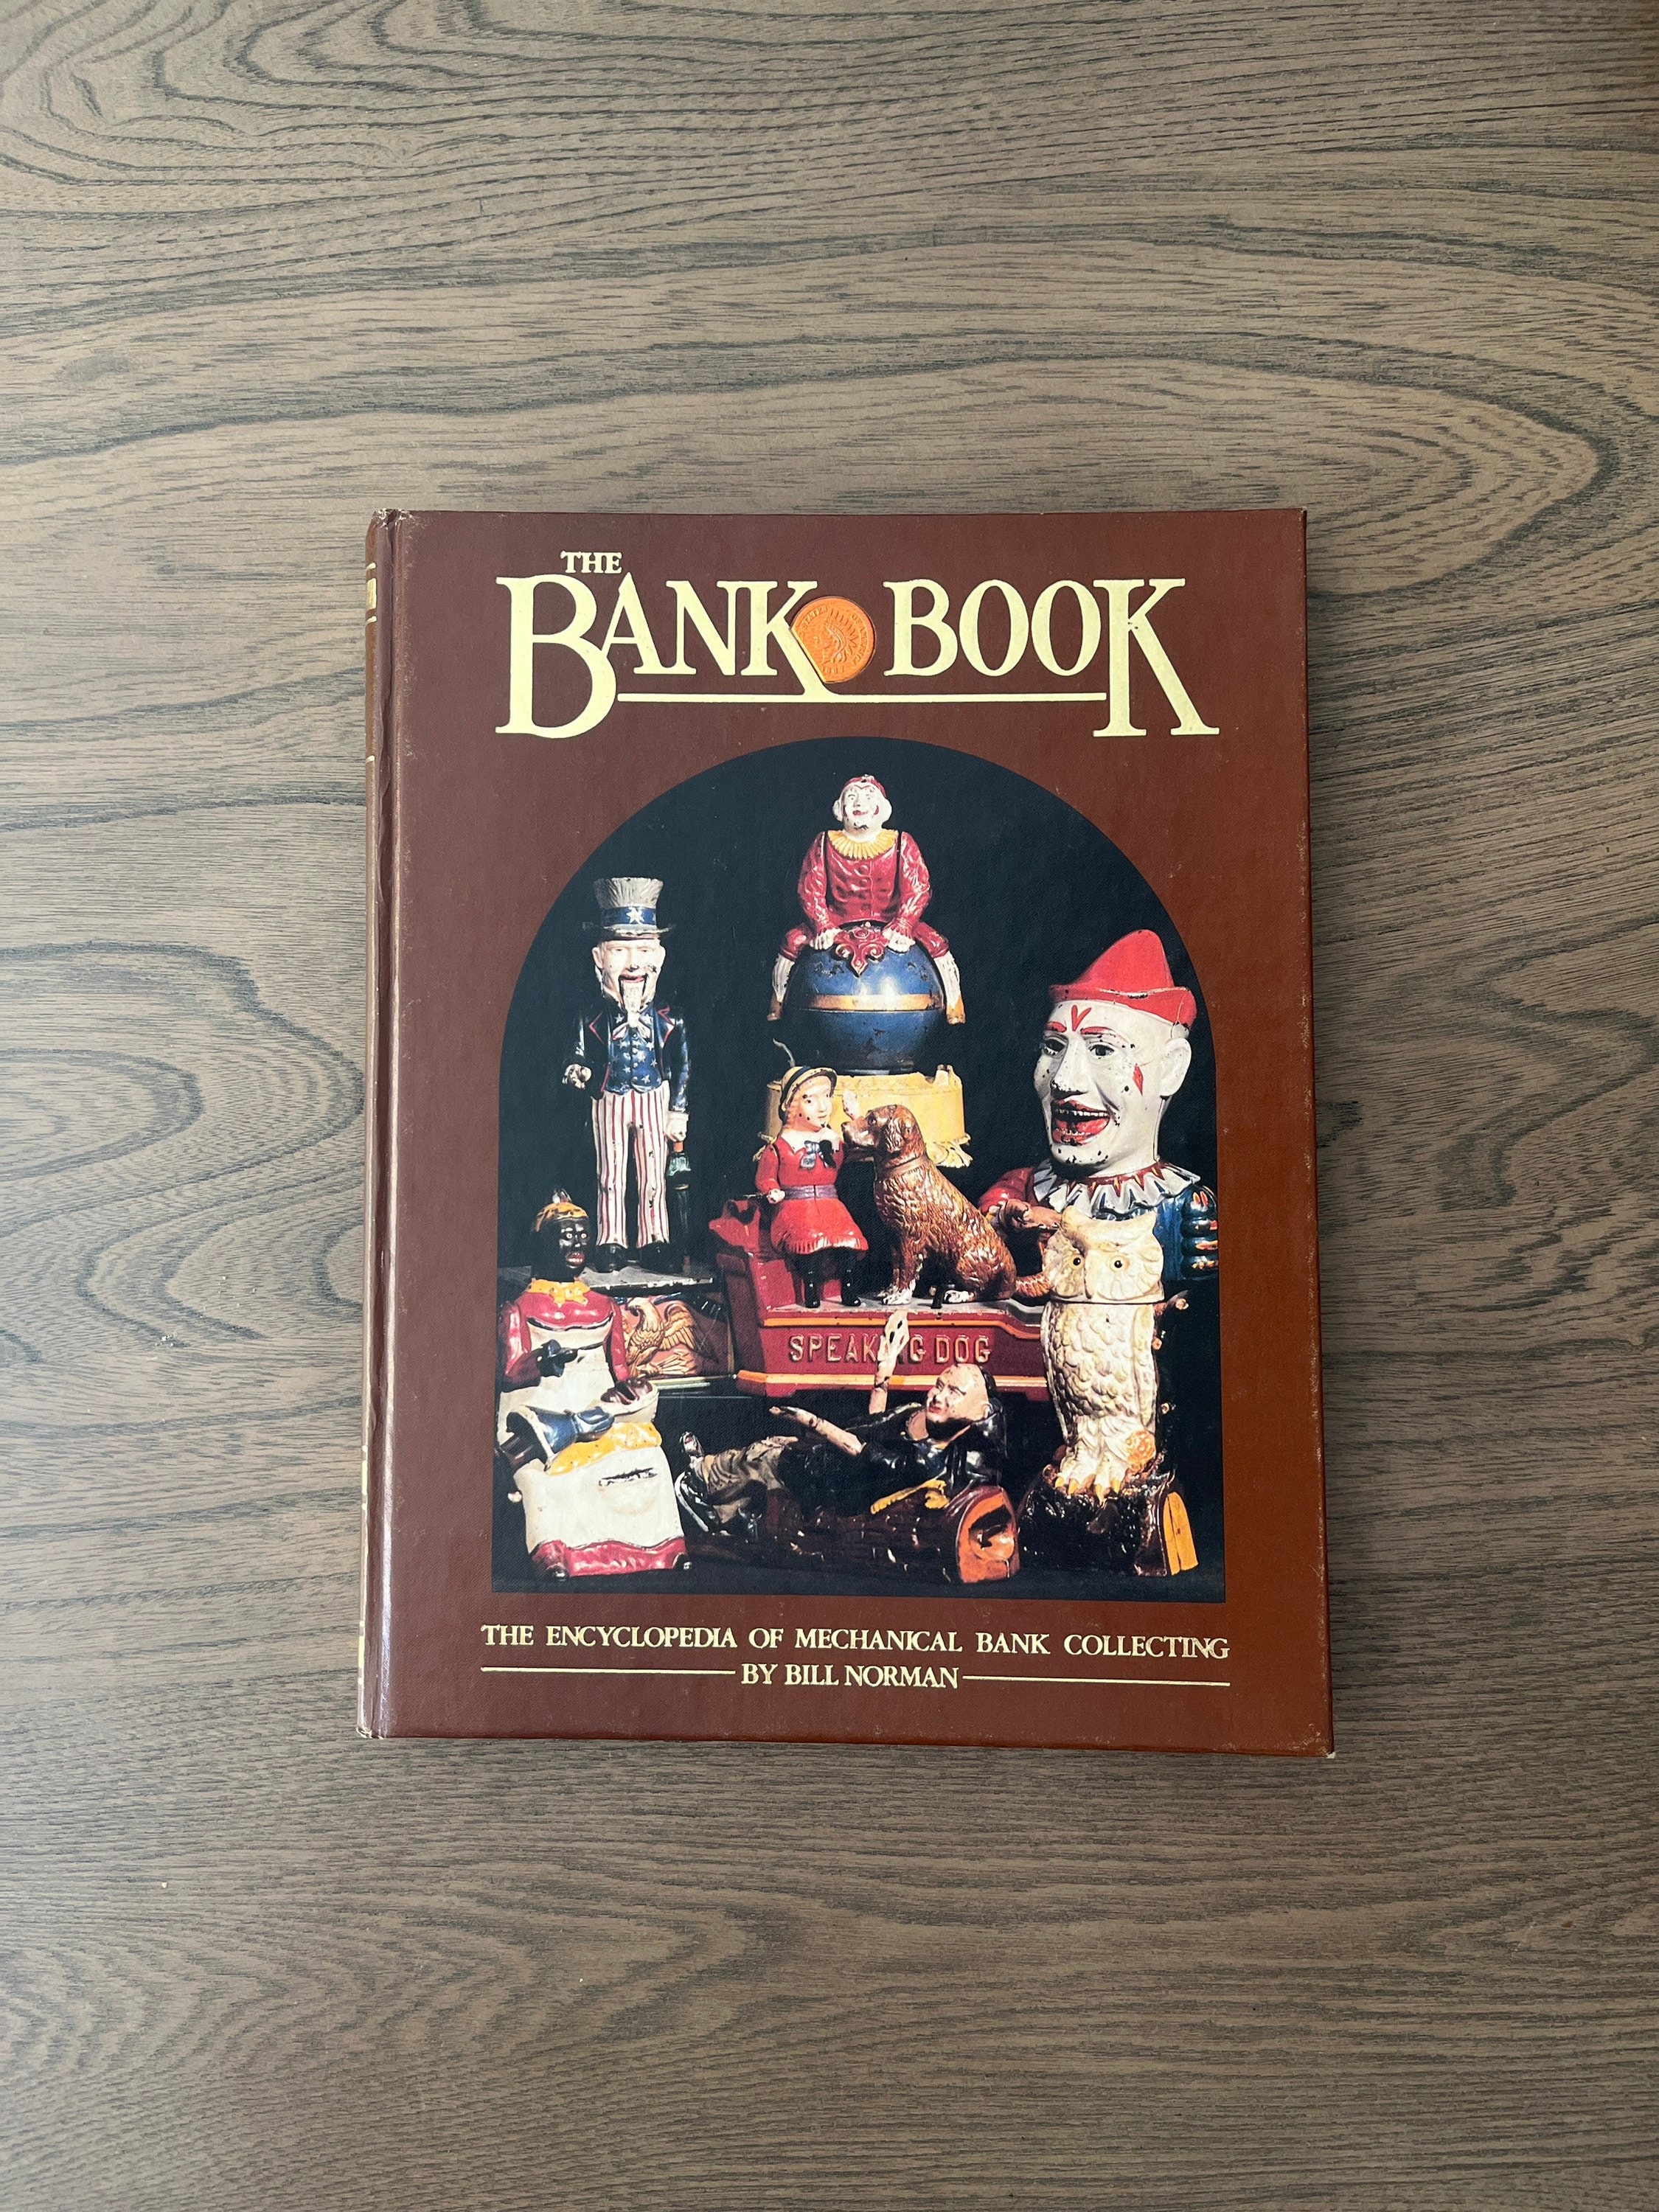 The Bank Book by Bill Norman, Encyclopedia of Mechanical Bank Collecting 